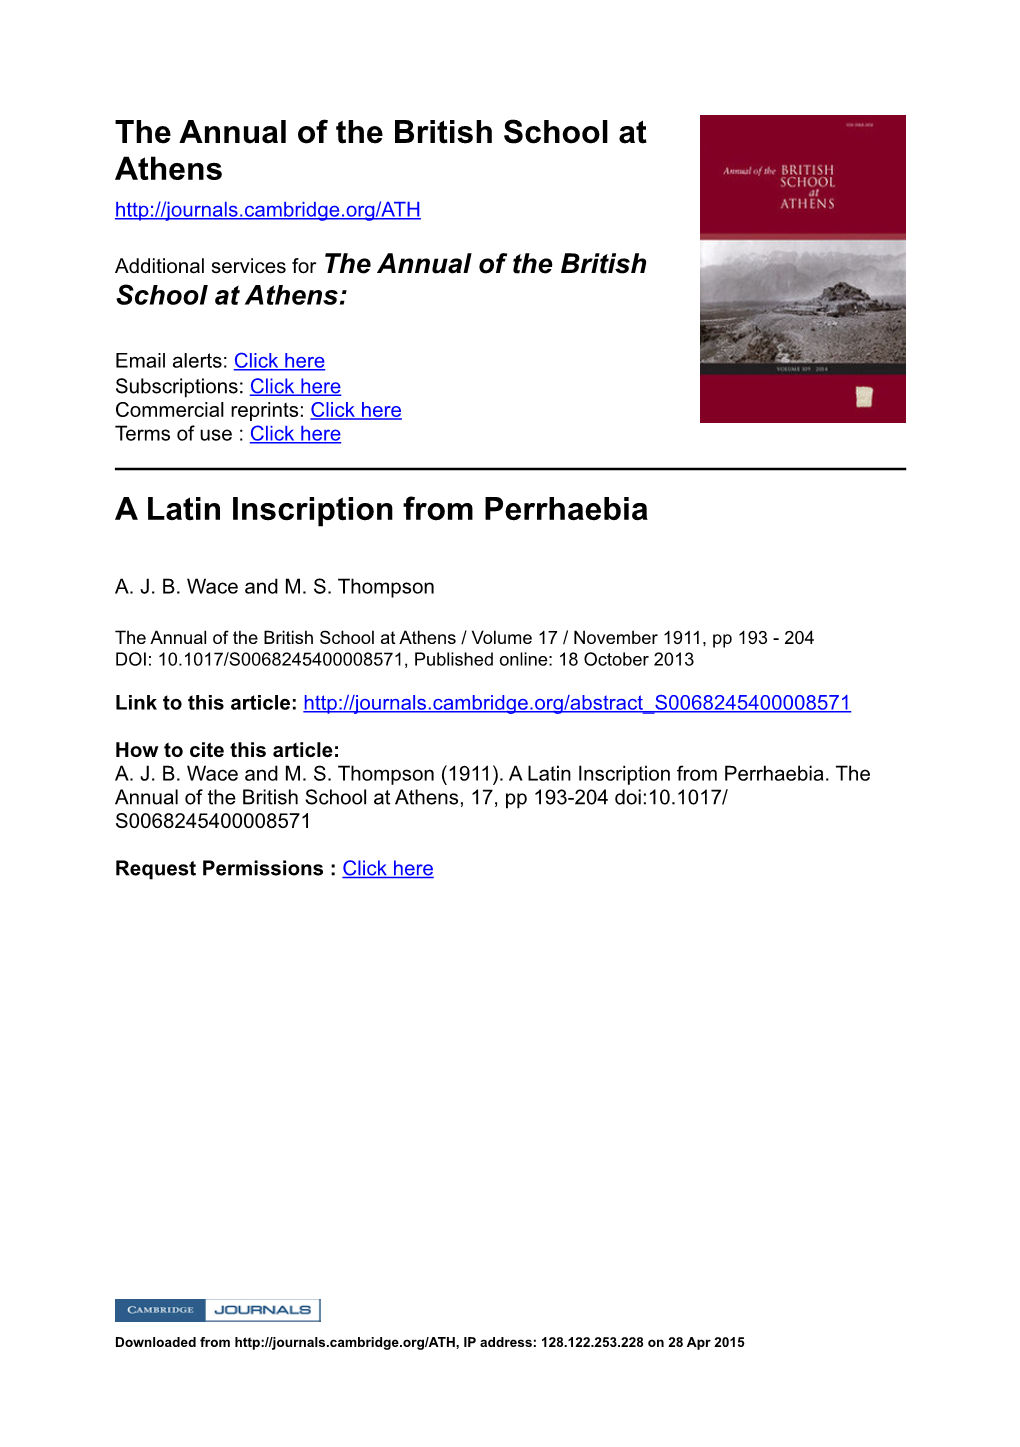 The Annual of the British School at Athens a Latin Inscription From